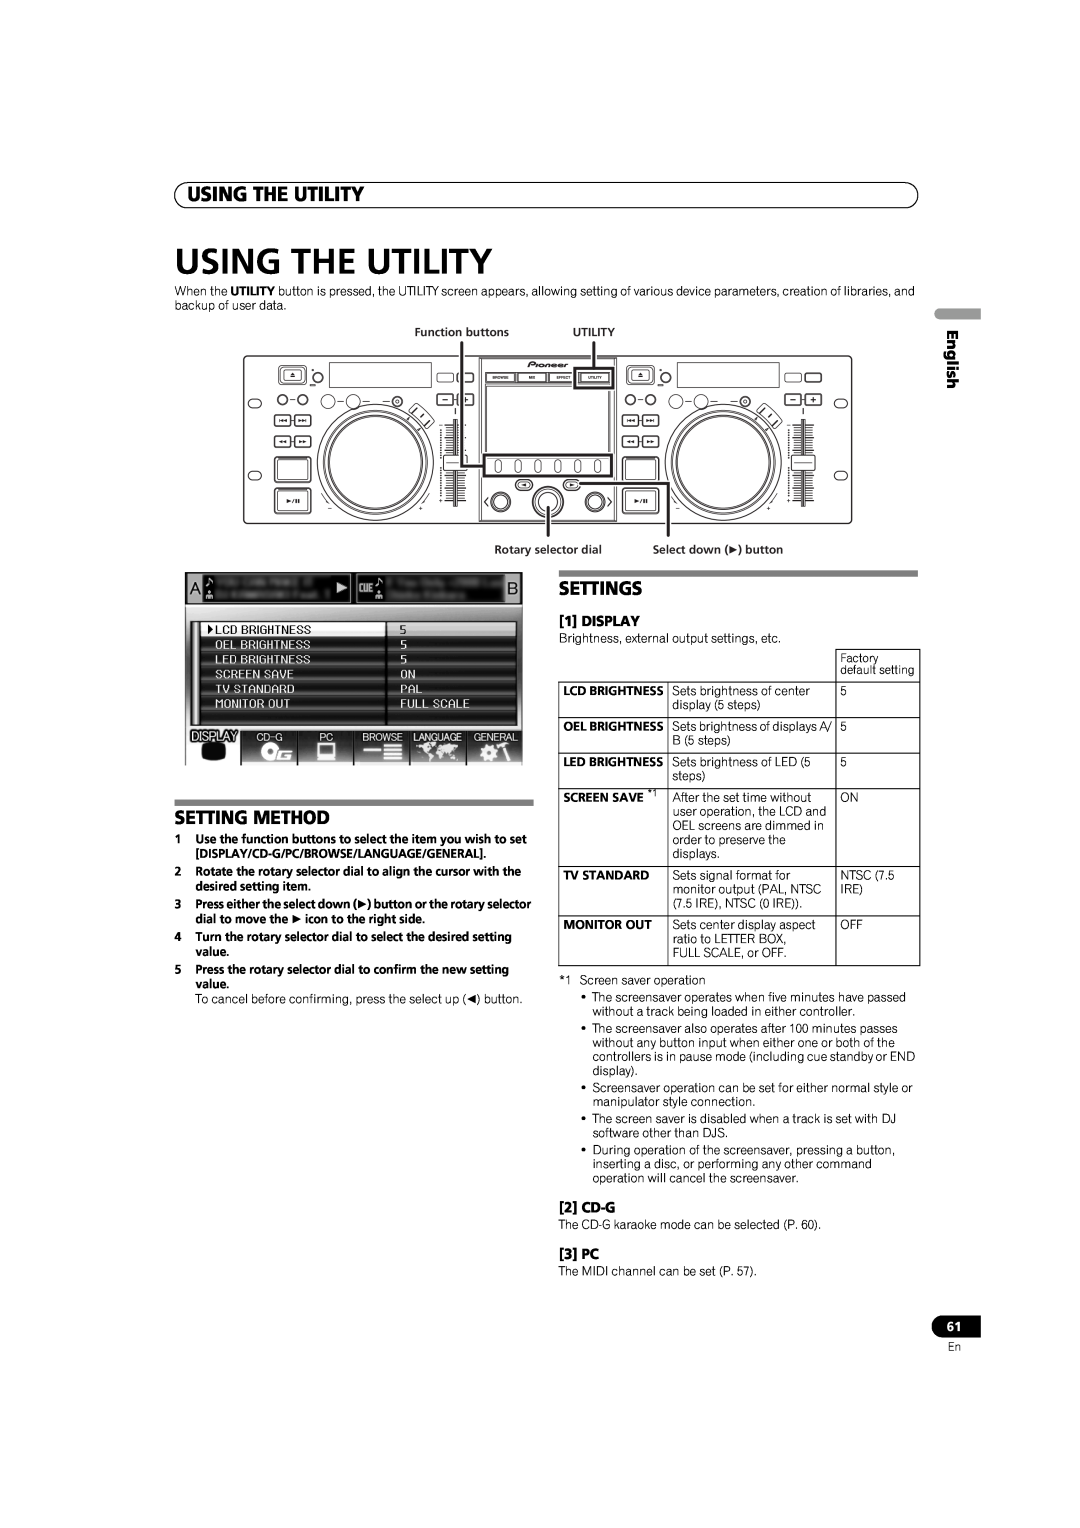 Pioneer MEP-7000 Using The Utility, Setting Method, Settings, English, Function buttons, Rotary selector dial 